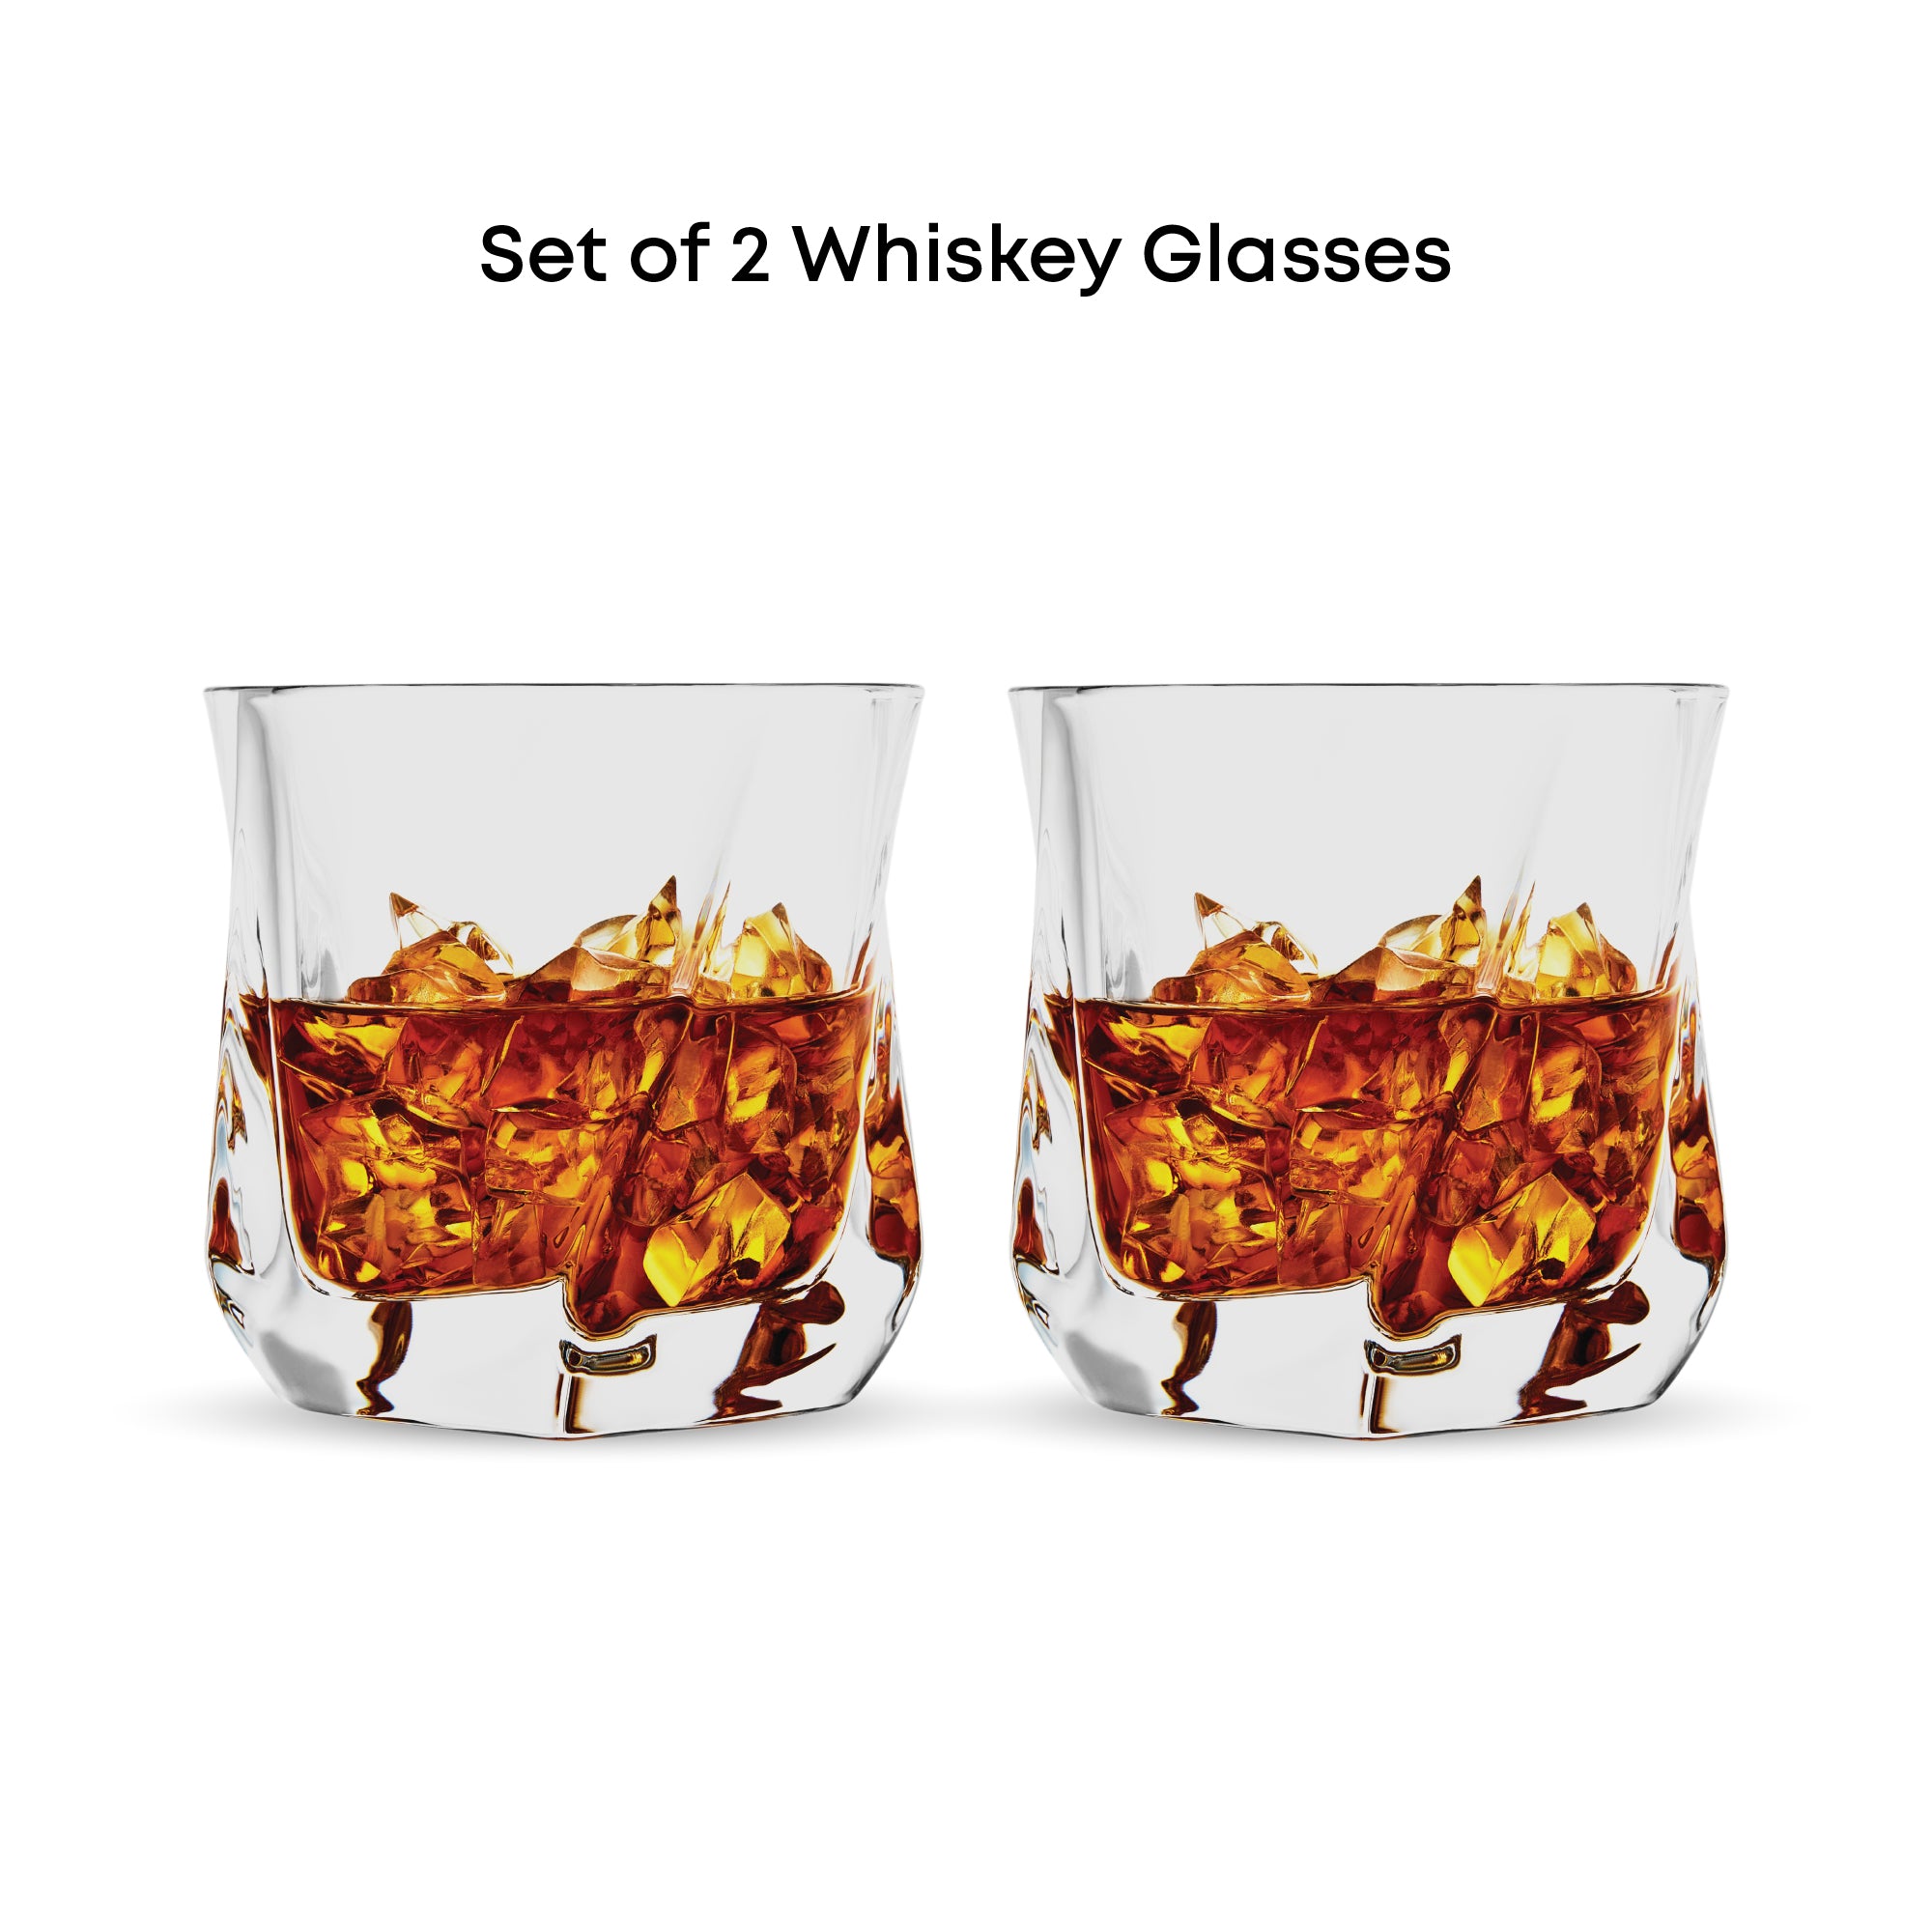 Set of 2 Whiskey Glasses on a white background filled with whiskey and ice. 